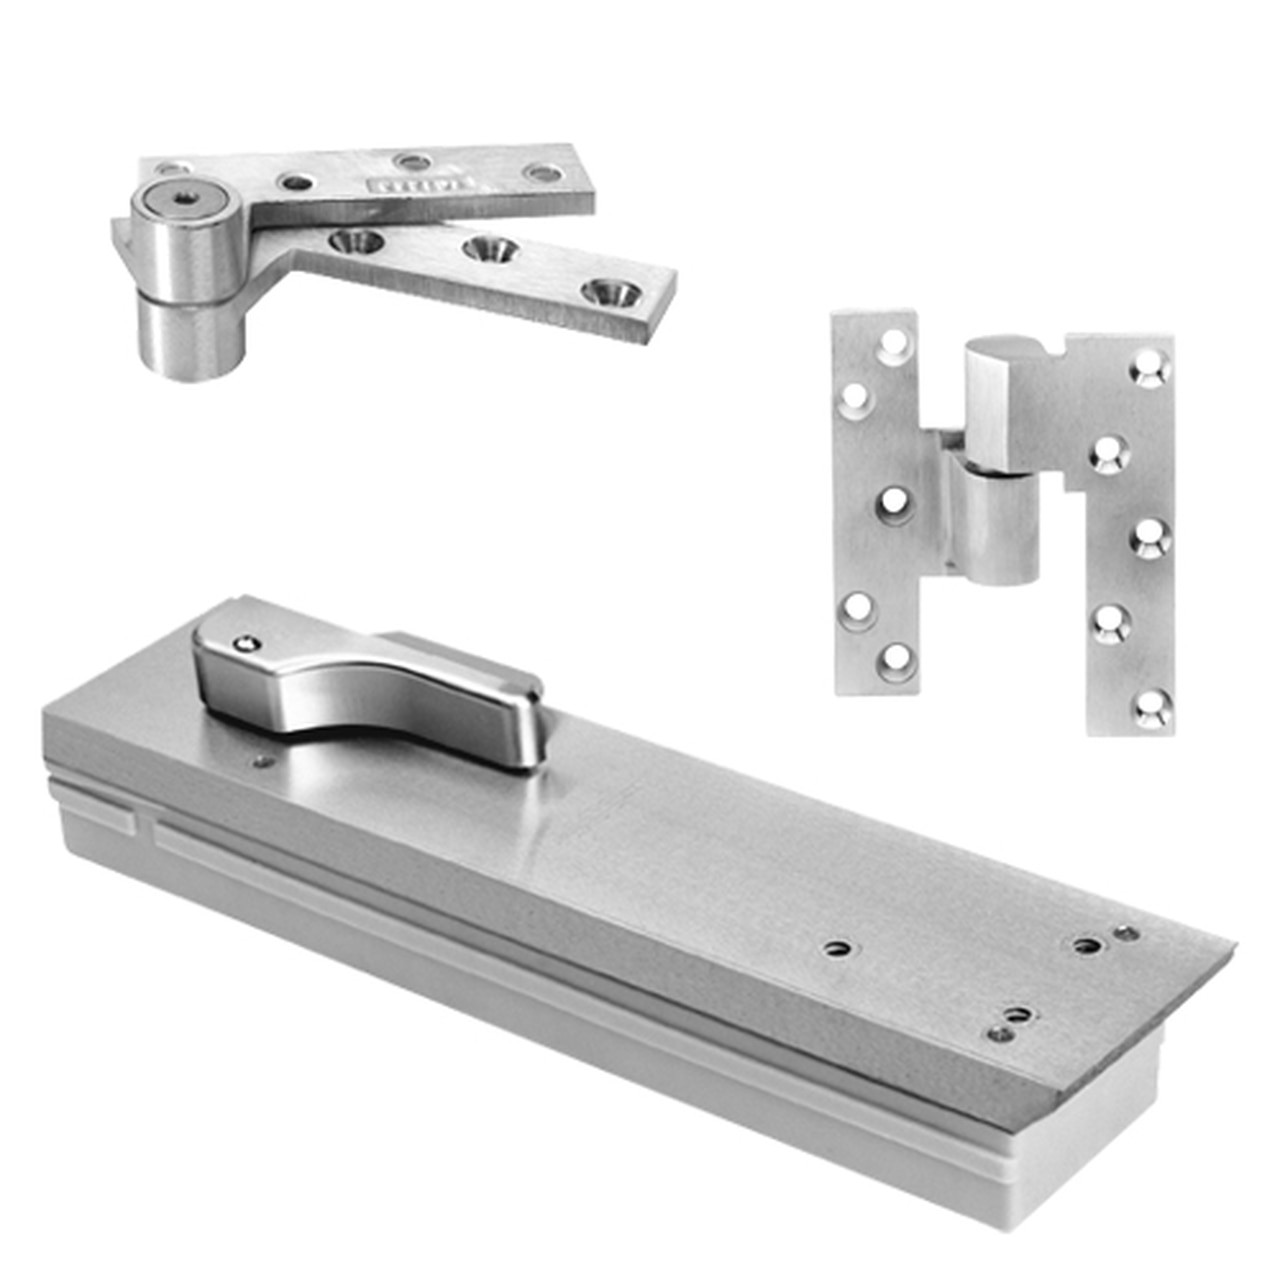 FQ5105NBC-LFP-LTP-RH-625 Rixson Q51 Series Fire Rated 3/4" Offset Hung Shallow Depth Floor Closers in Bright Chrome Finish